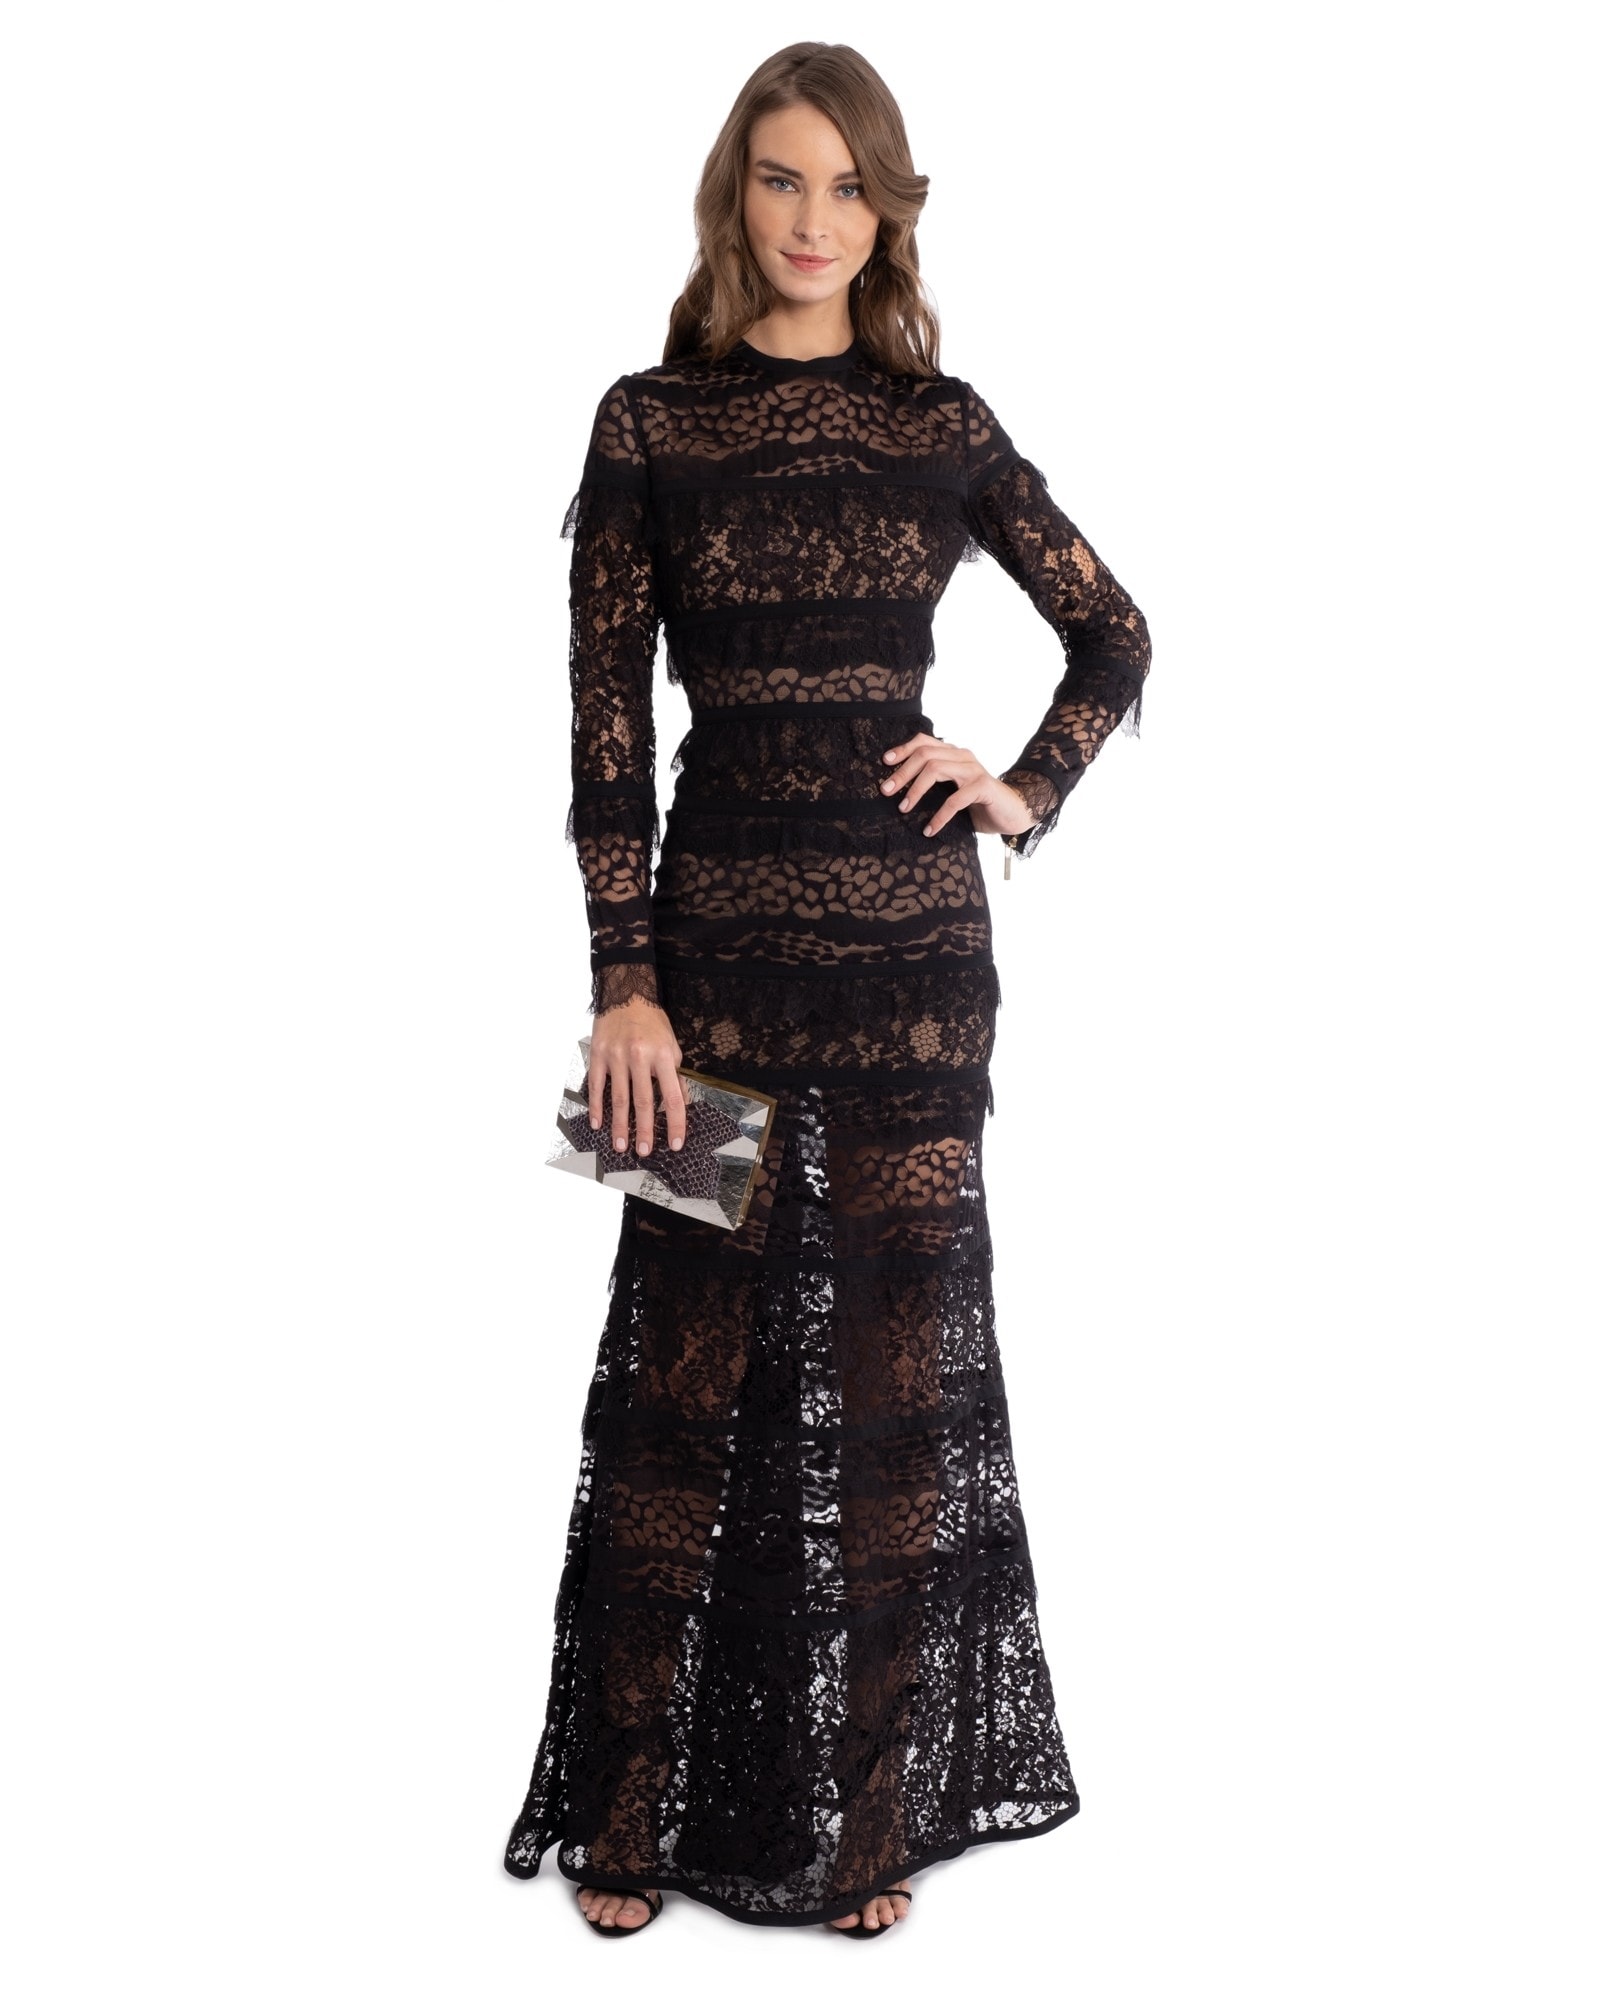 Buy MISSMAY Women's Vintage Floral Lace Long Sleeve V Neck Cocktail Formal  Swing Dress, D-black-1, Small at Amazon.in